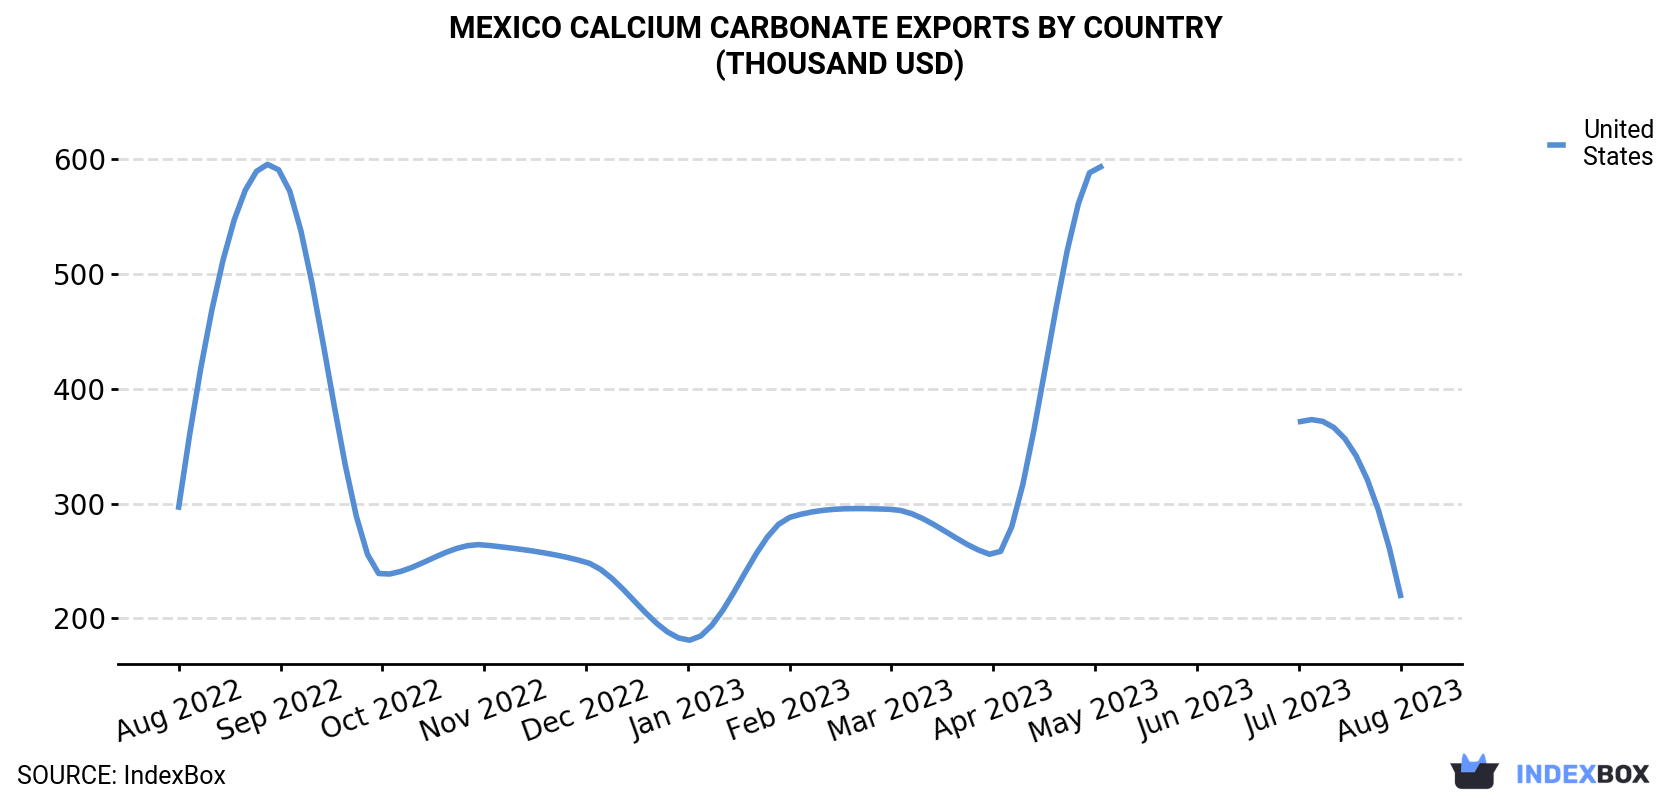 Mexico Calcium Carbonate Exports By Country (Thousand USD)